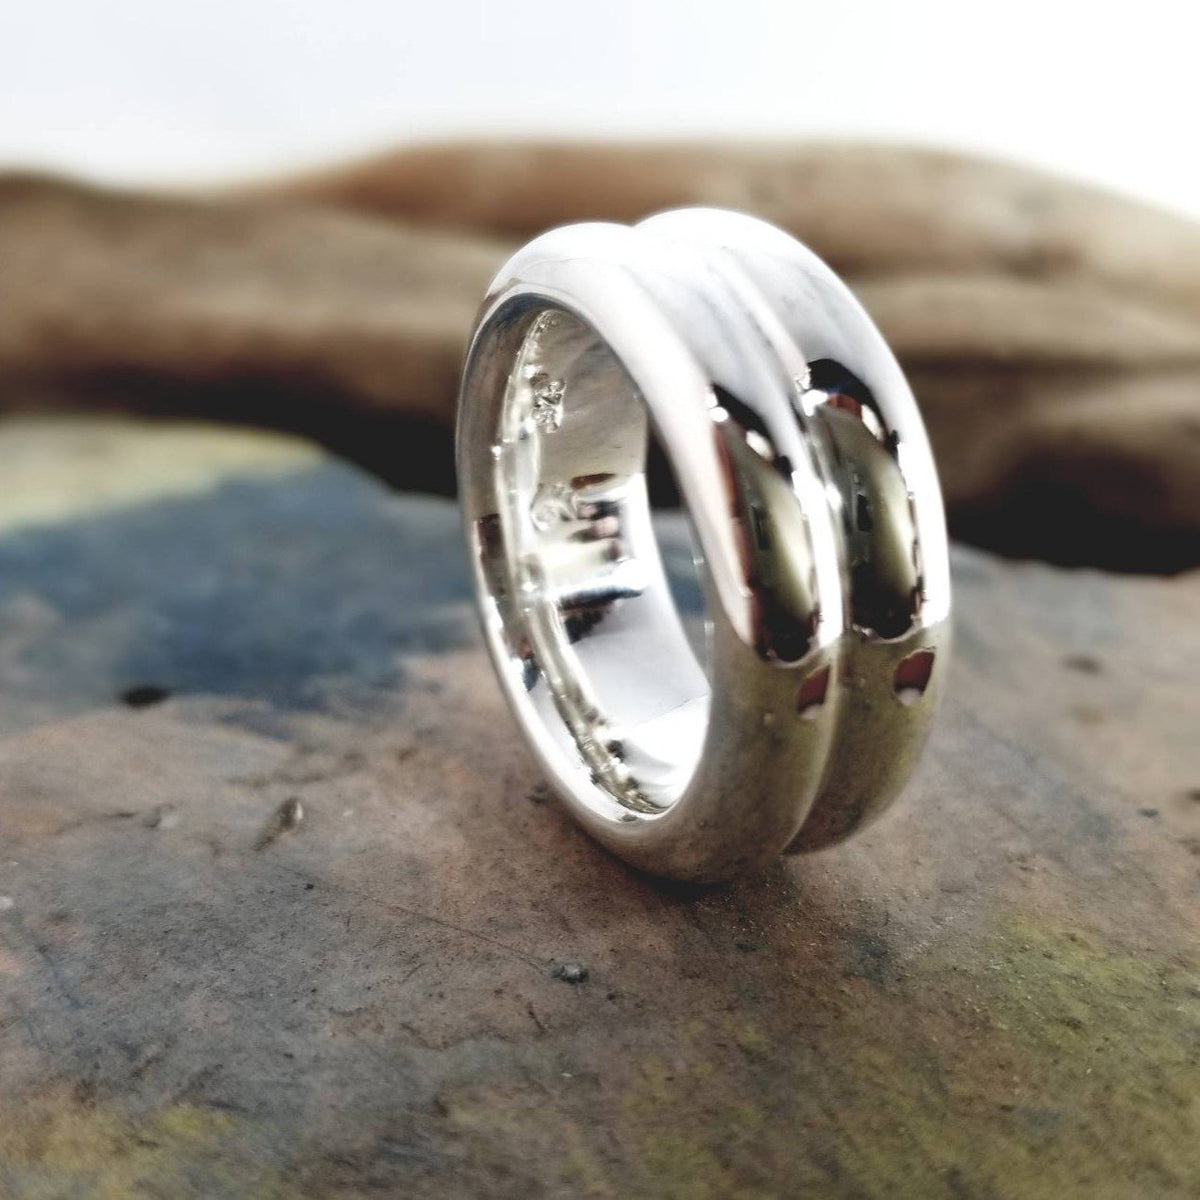 Handcrafted Double Loop Sterling Silver Art Ring - Unique Statement Piece -  Nine Amulets